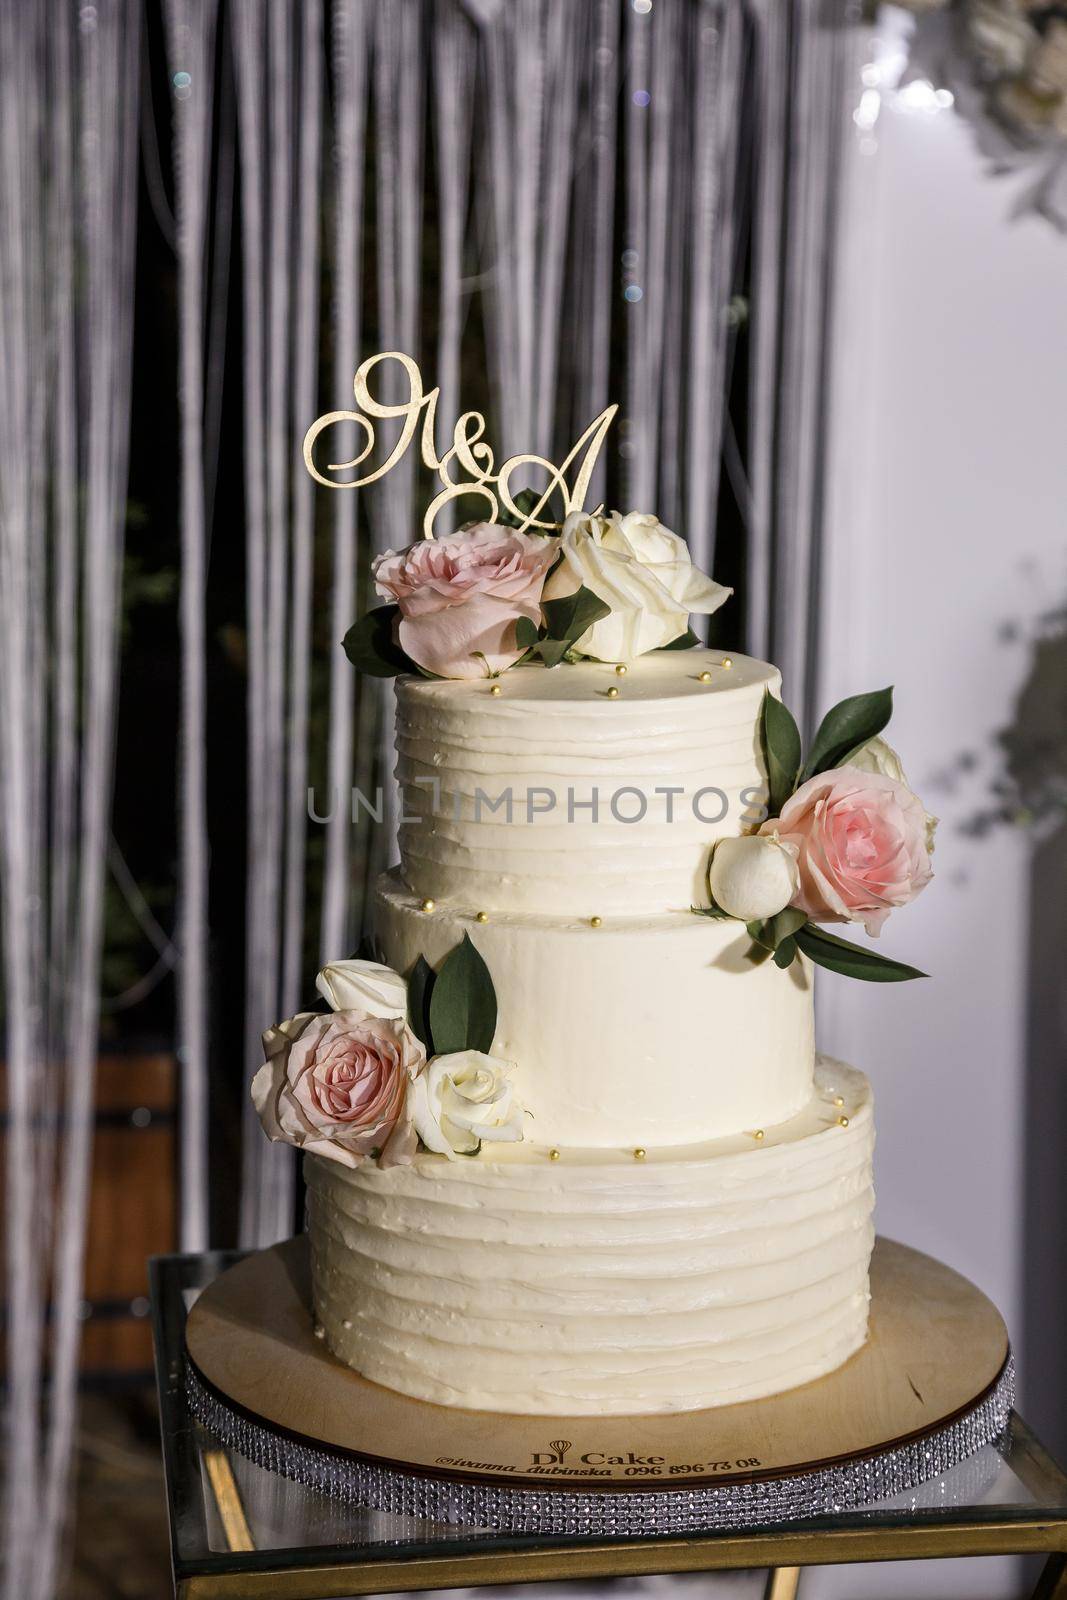 Beautiful tiered delicious dessert sweet cake for newlyweds.